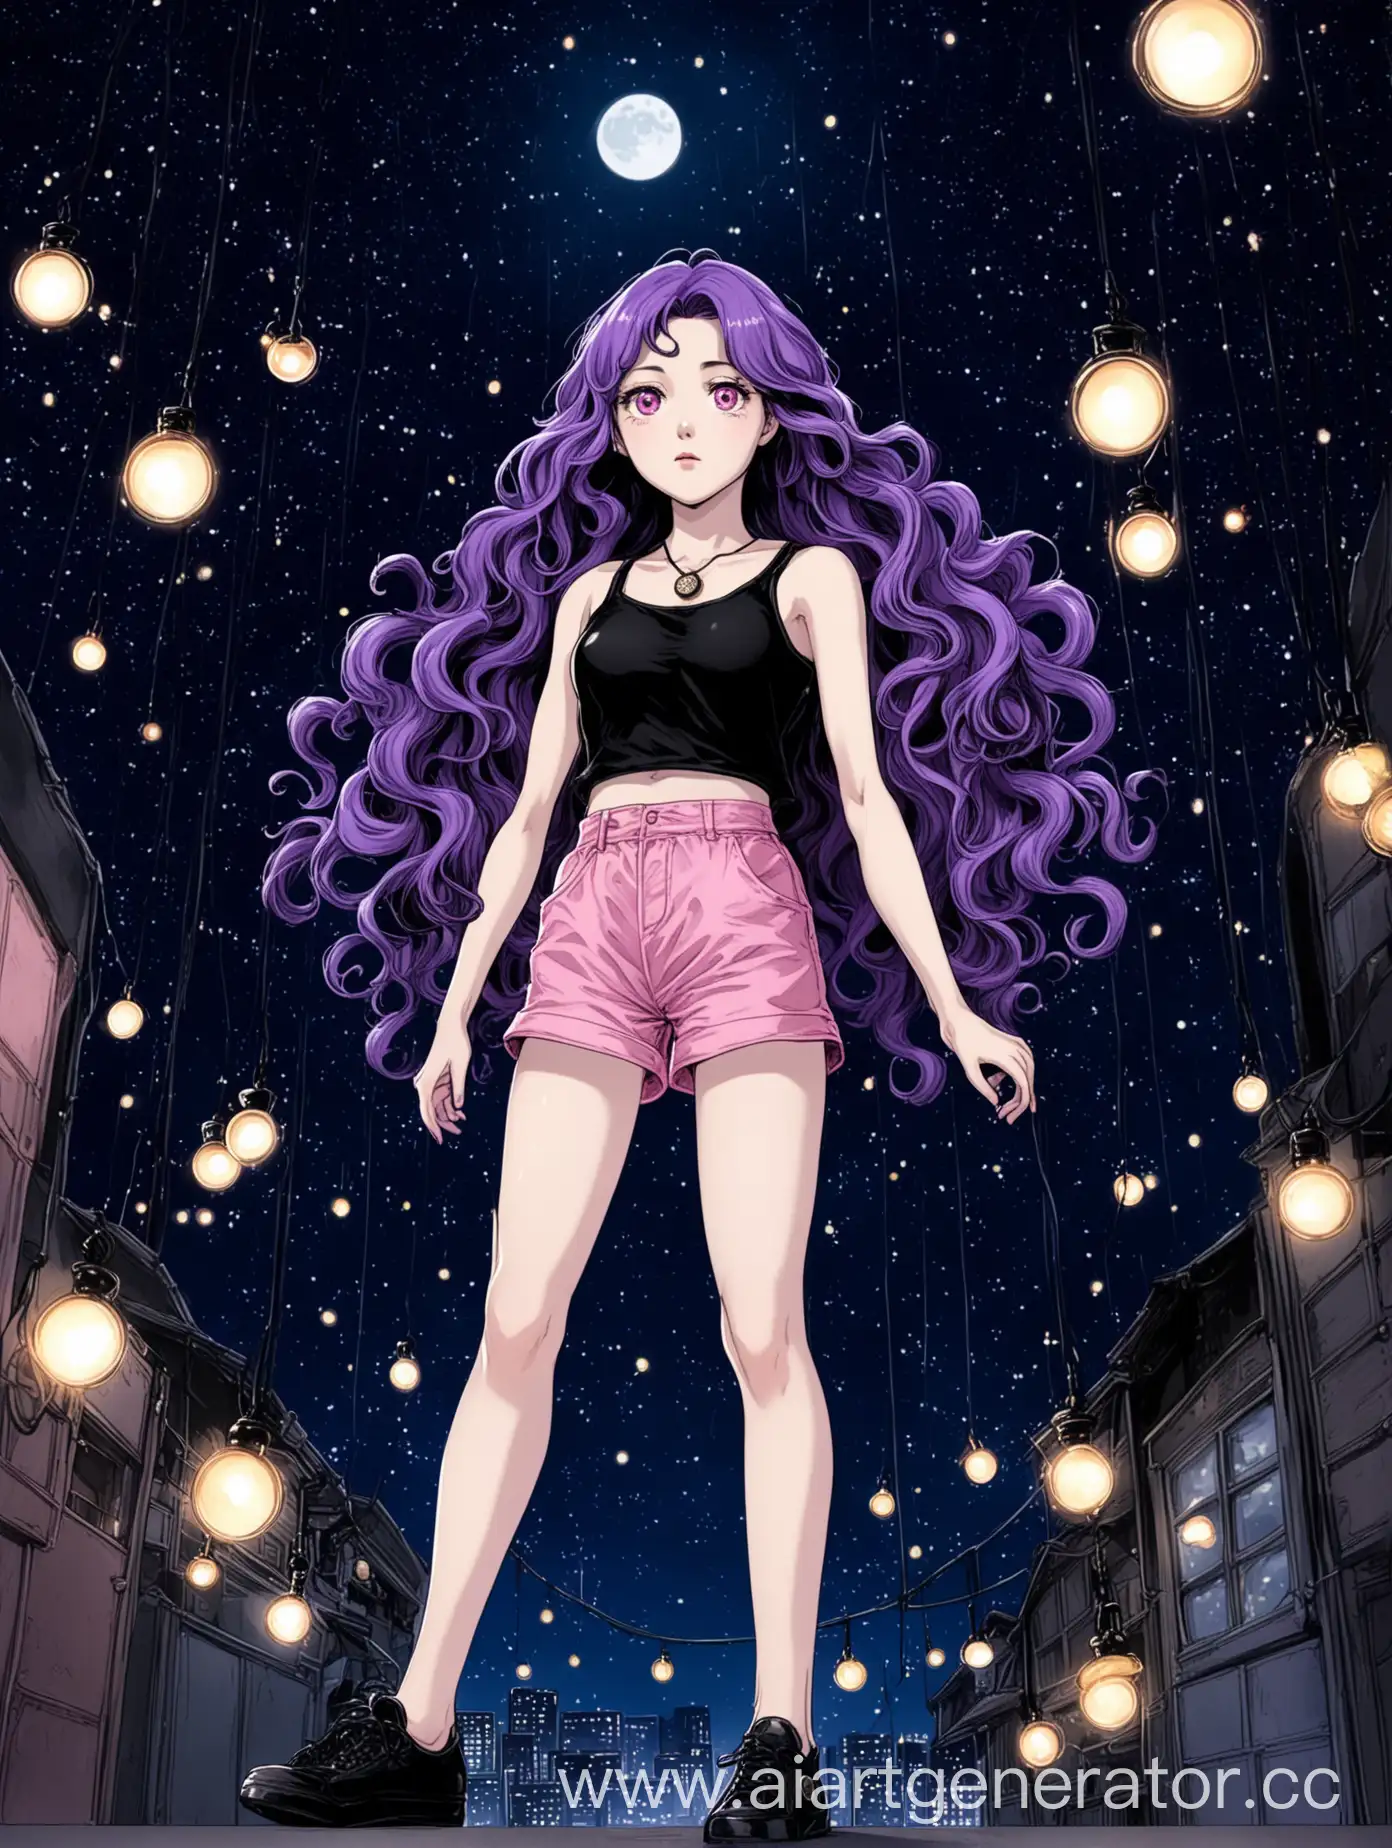 In the style of a Korean manhwa, a 17-year-old girl with long curly purple hair and pink eyes. She is dressed in a black tank top and high-waisted pink shorts. She wears black shoes on her feet. She stands against the backdrop of the night sky, various lights flying around her, and she holds black pocket watches in her hands.